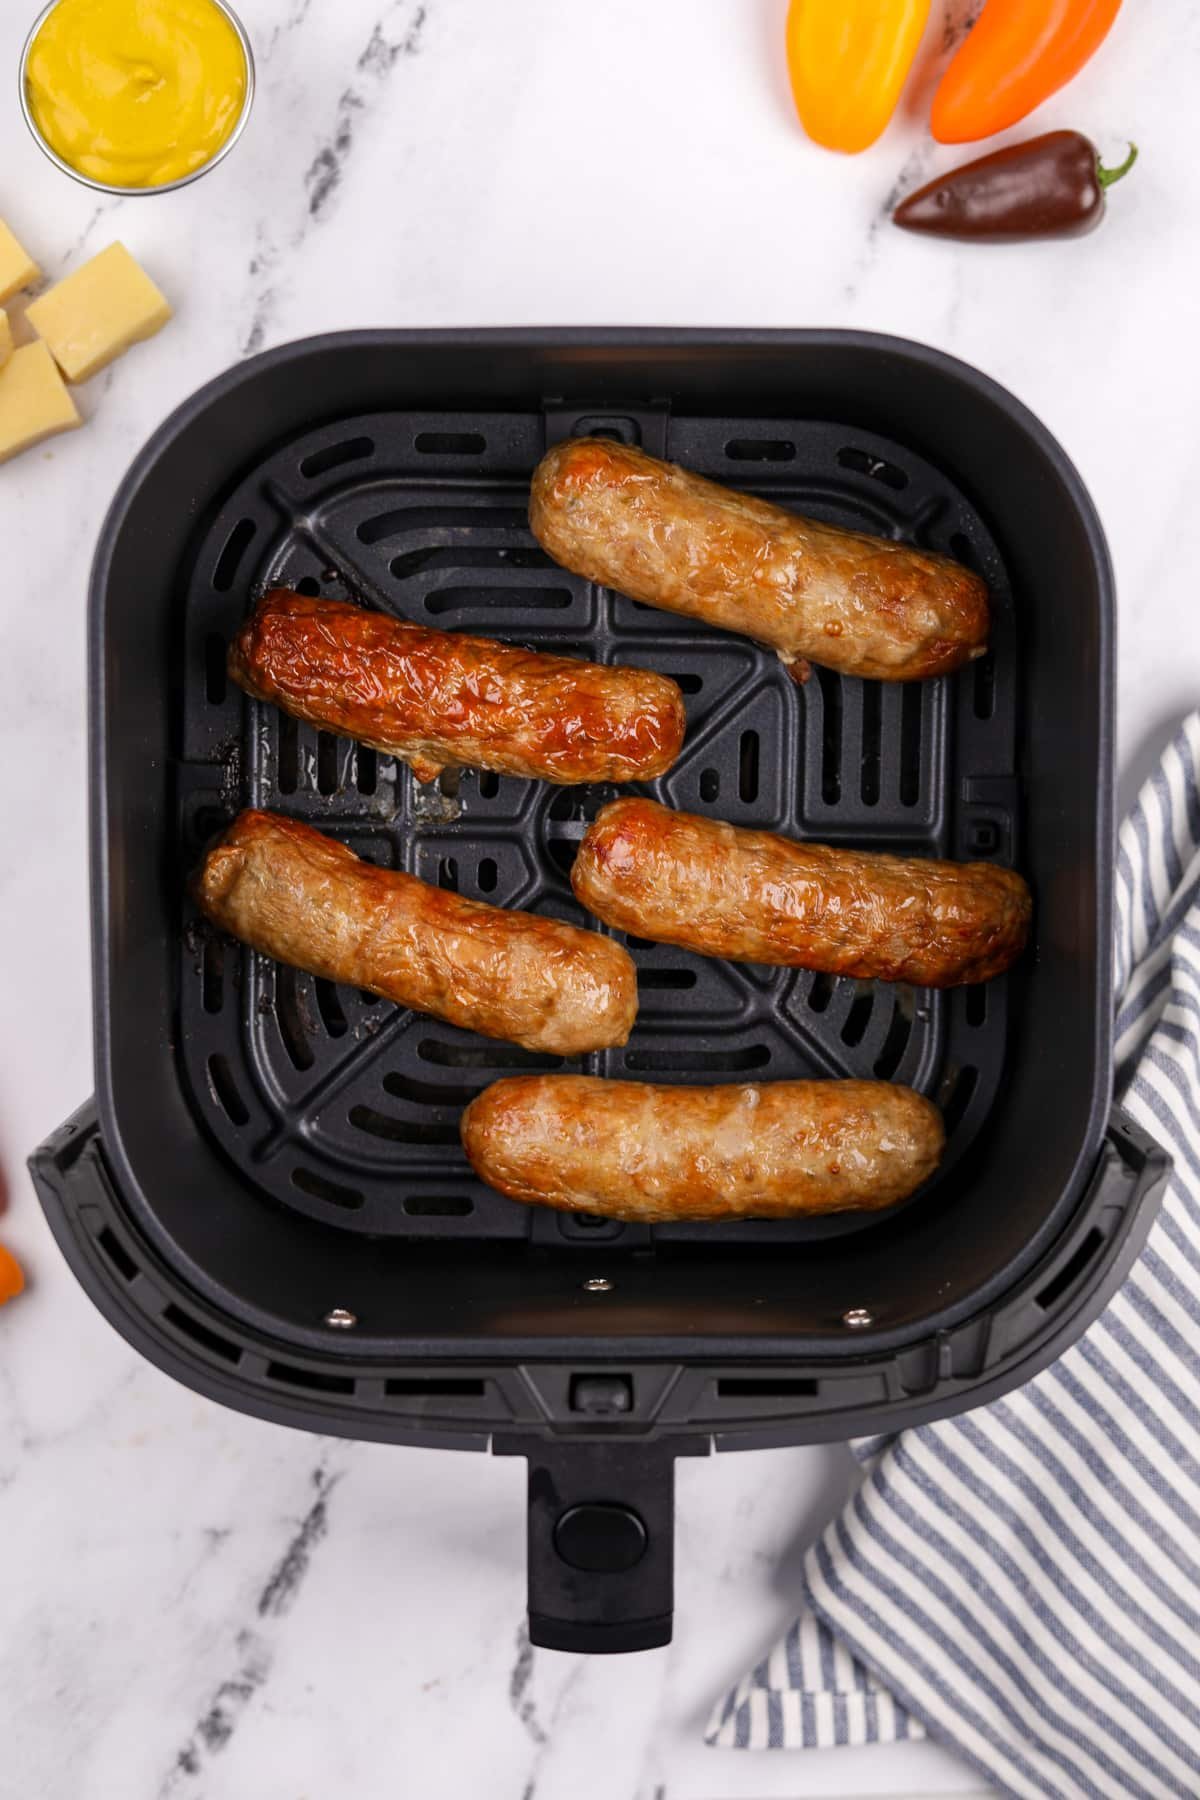 An air fryer basket with cooked sausages inside.